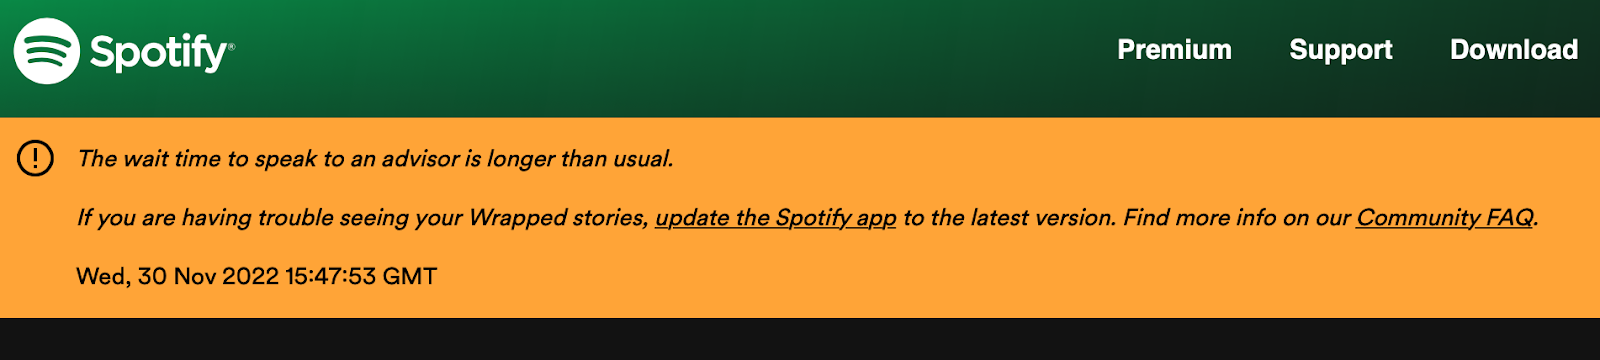 The screenshot shows Spotify's website with a widget at the top showing that there is a wait time for help. However, it does show where you can get help yourself.